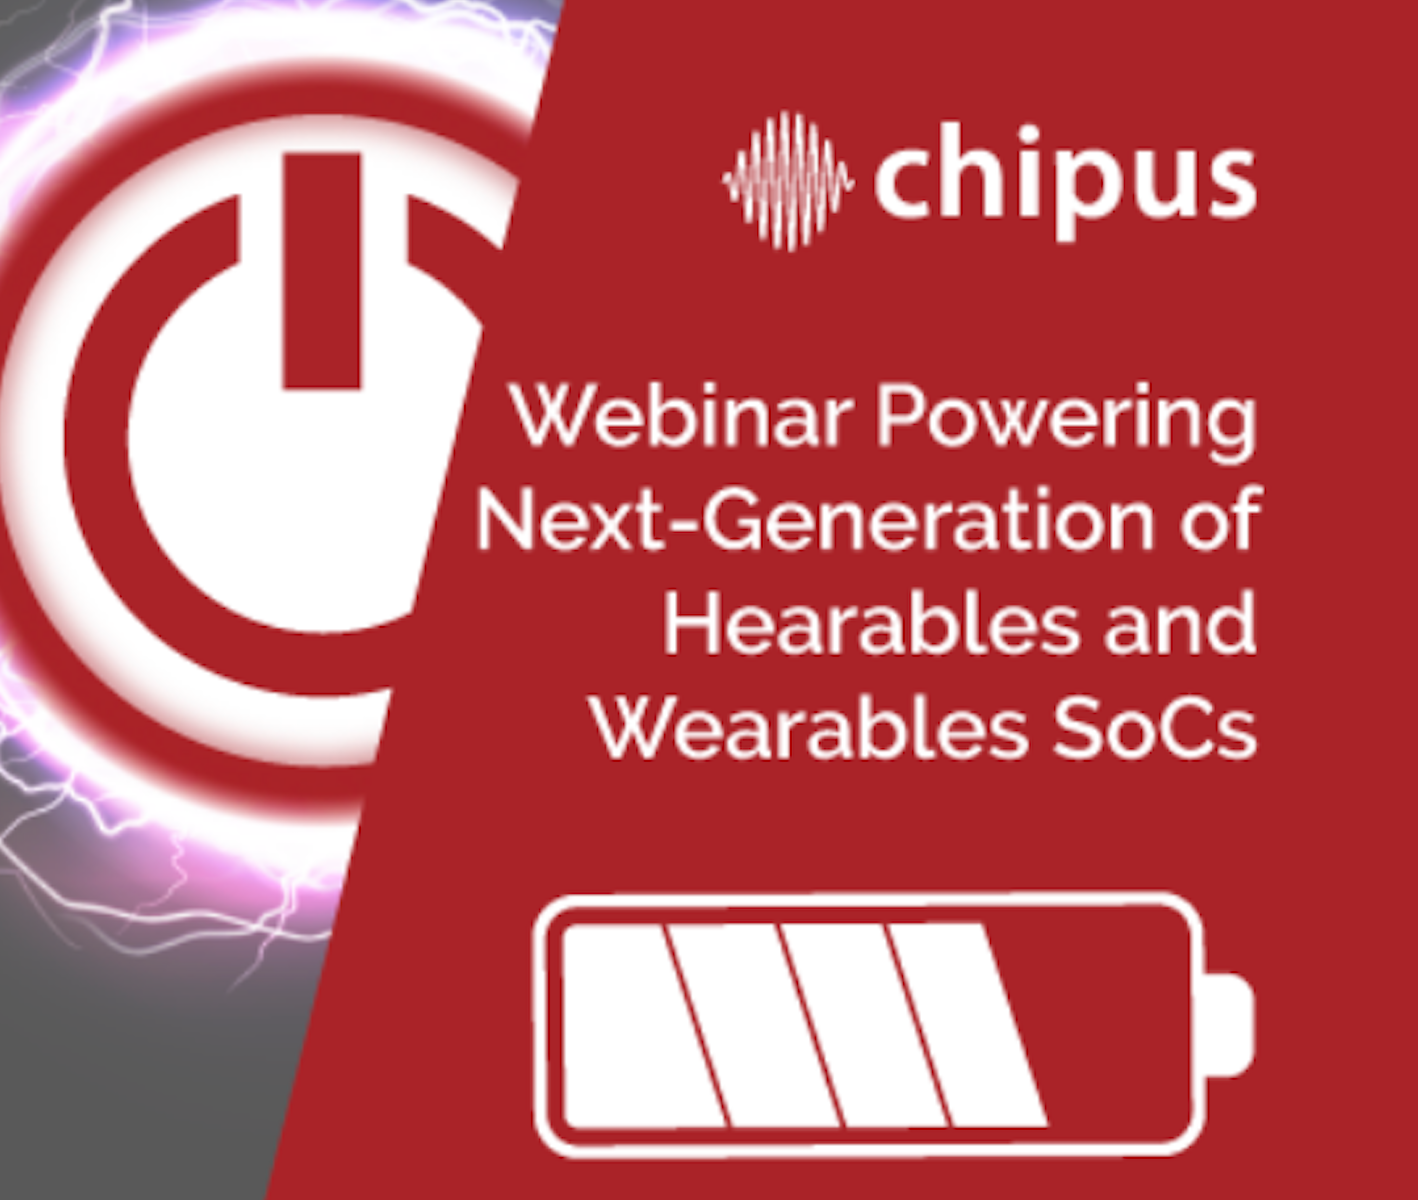 Powering the Next Generation of Hearables and Wearables with Chipus